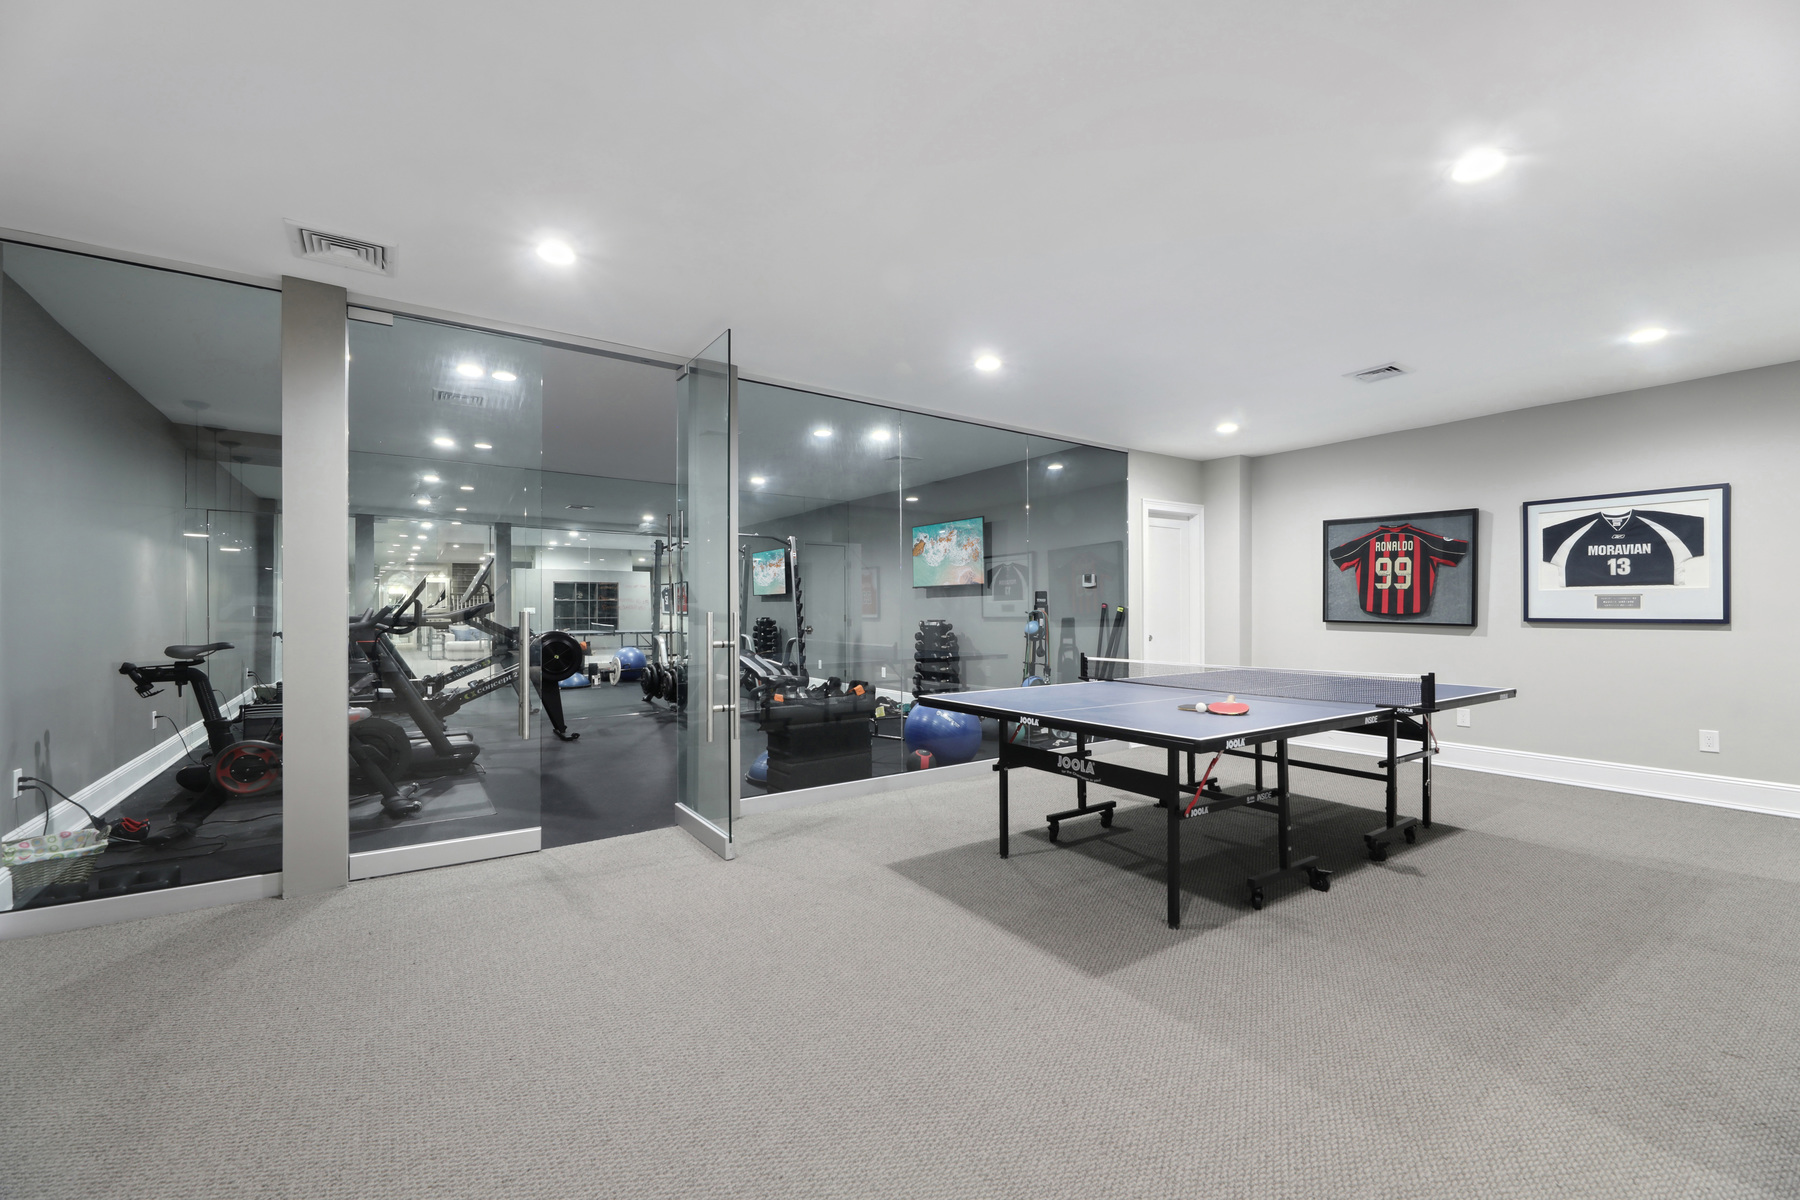 200 Highland Ave, Short Hills NJ - Lower Level Ping pong and exercise room